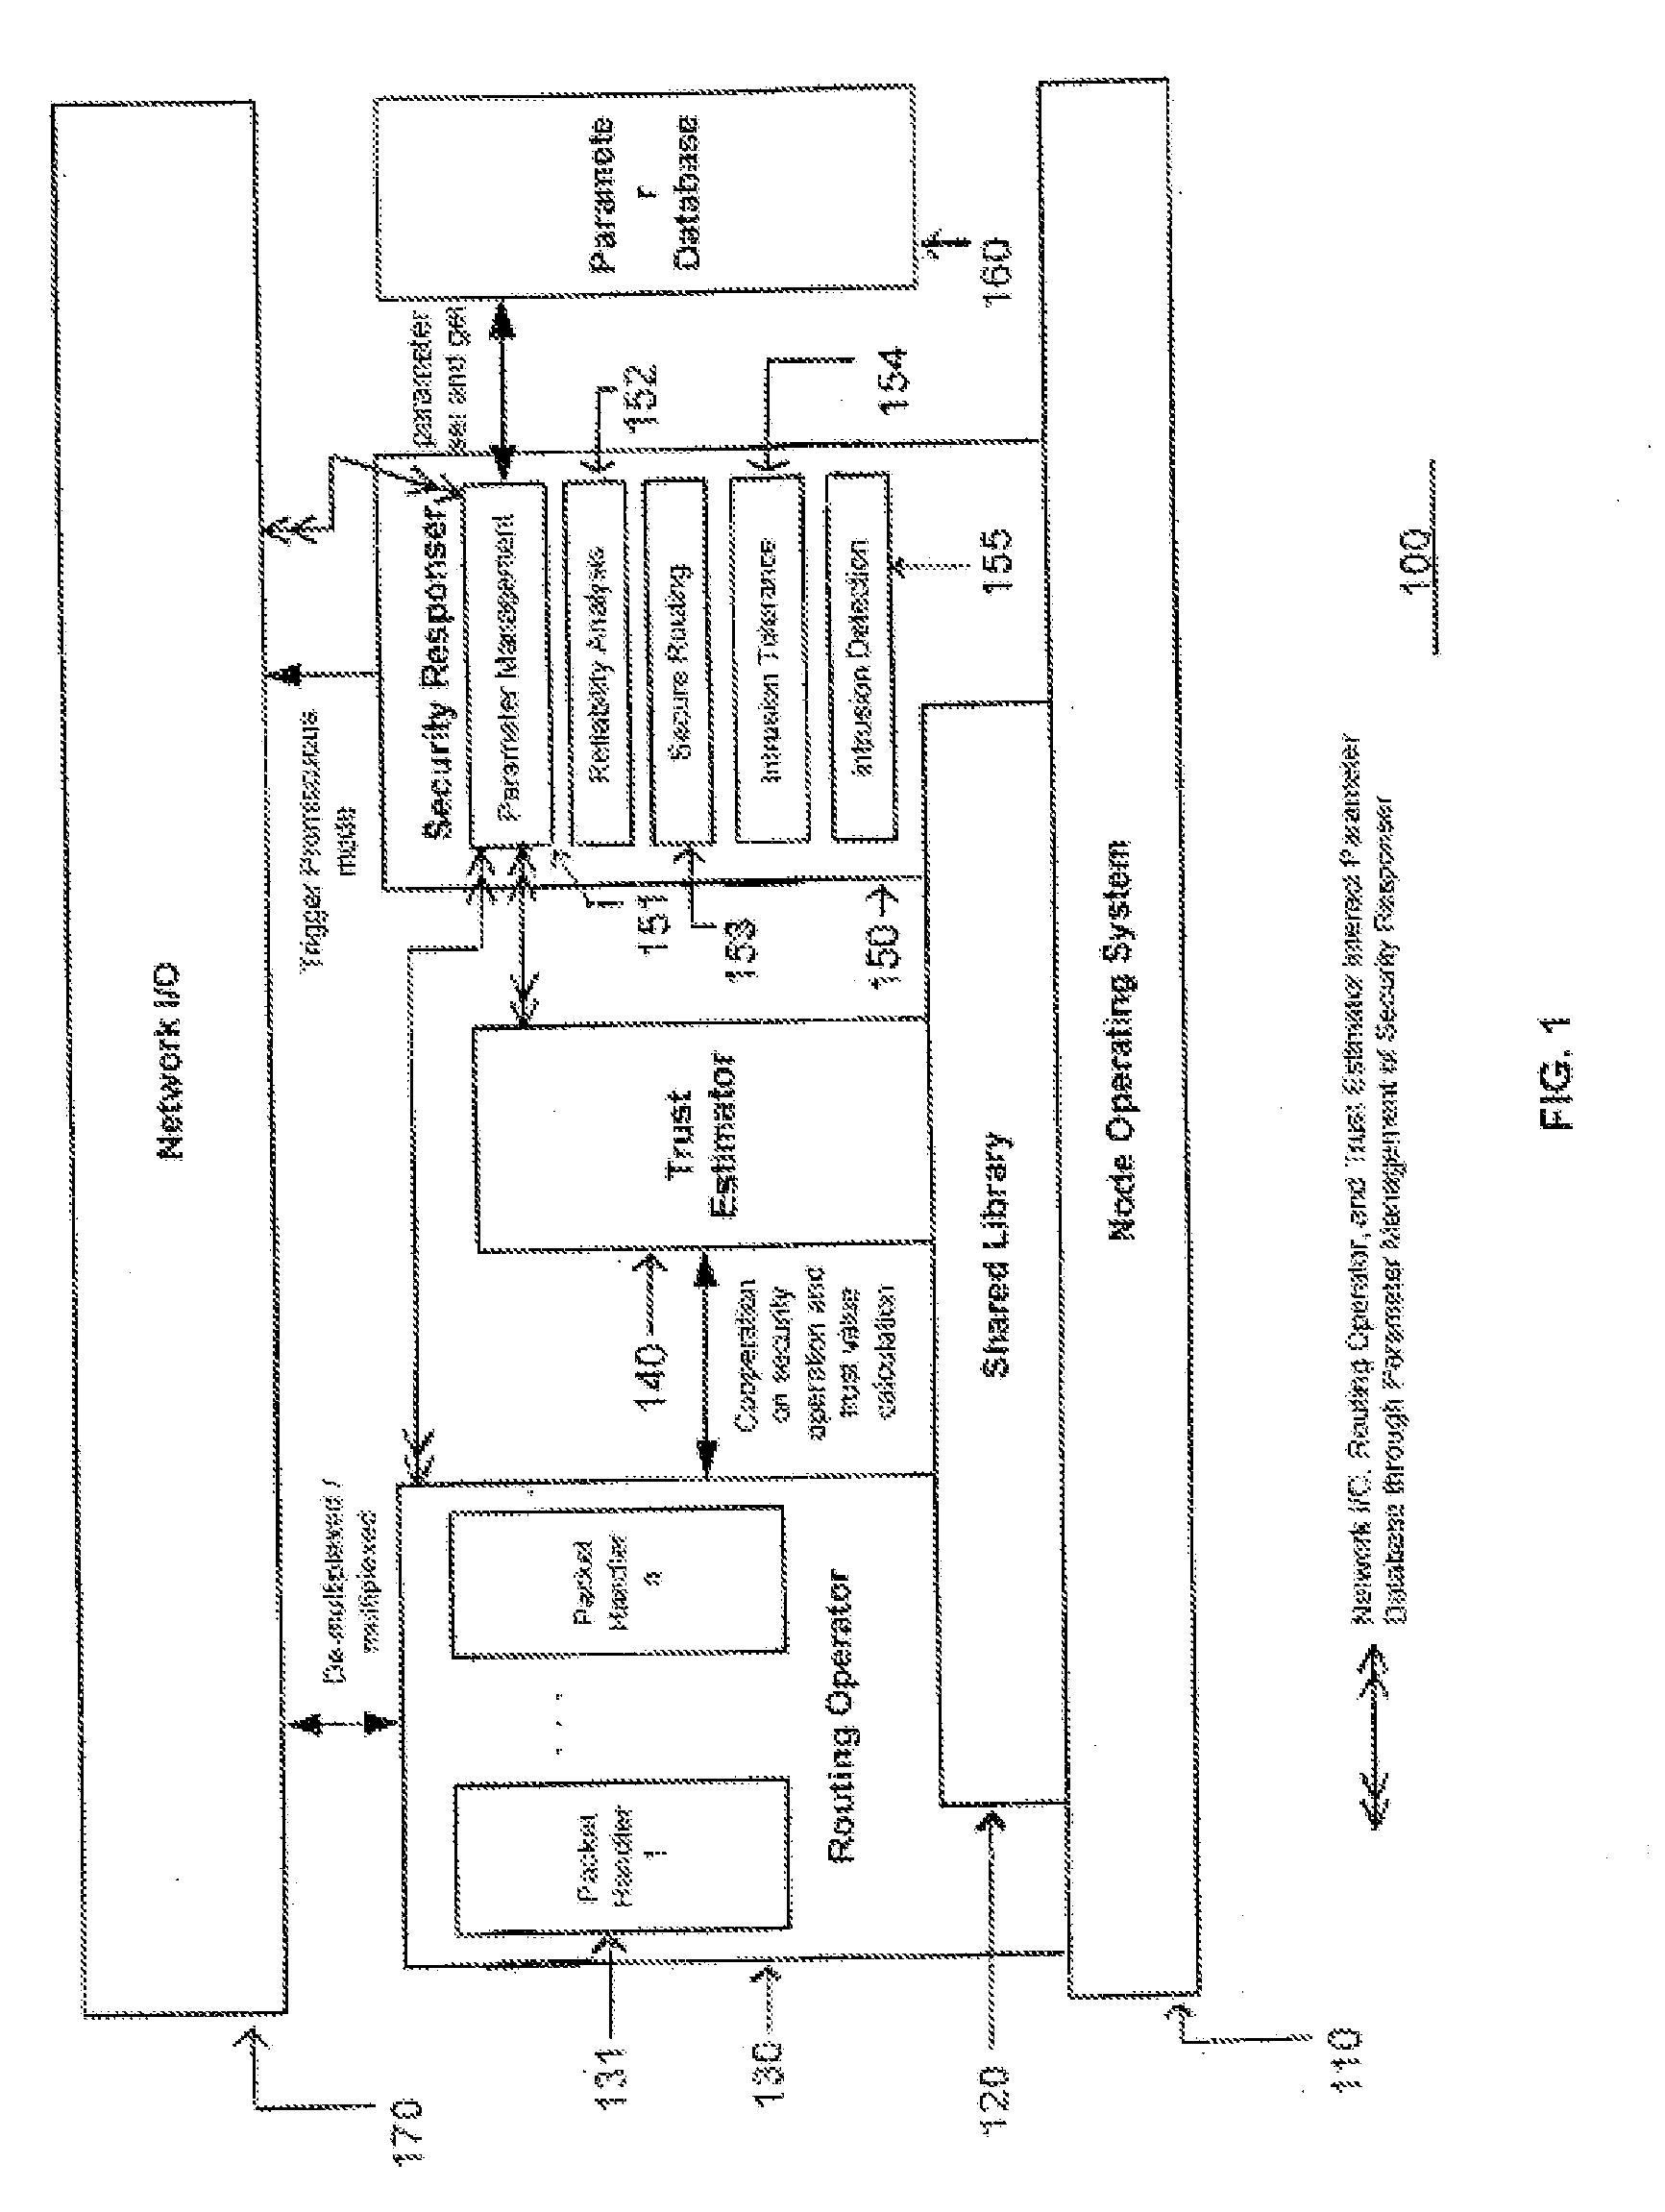 Wireless sensor network and adaptive method for monitoring the security thereof